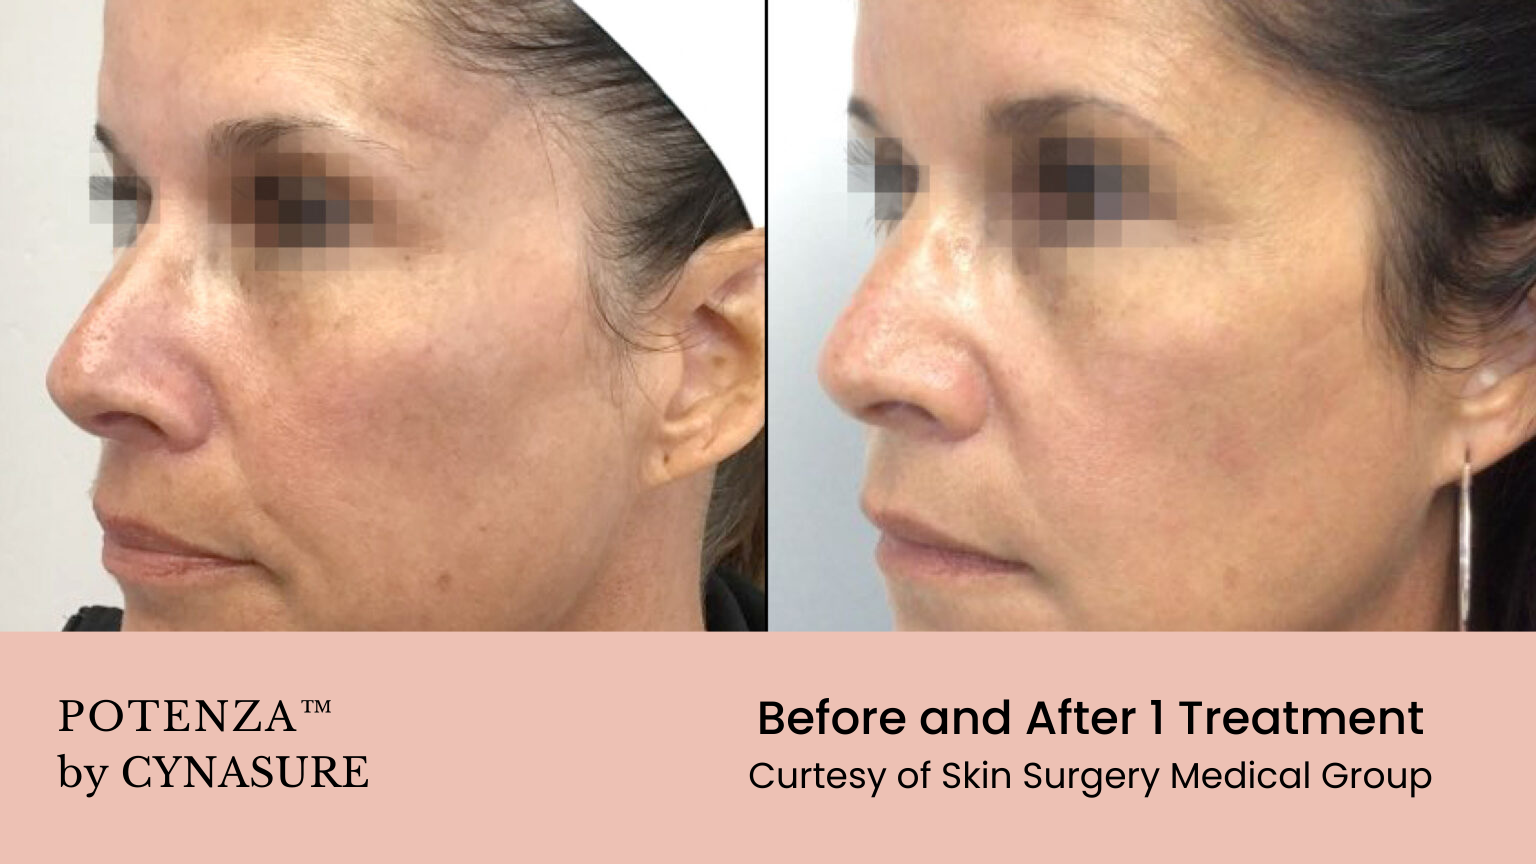 A woman 's face is shown before and after a treatment by cynasure